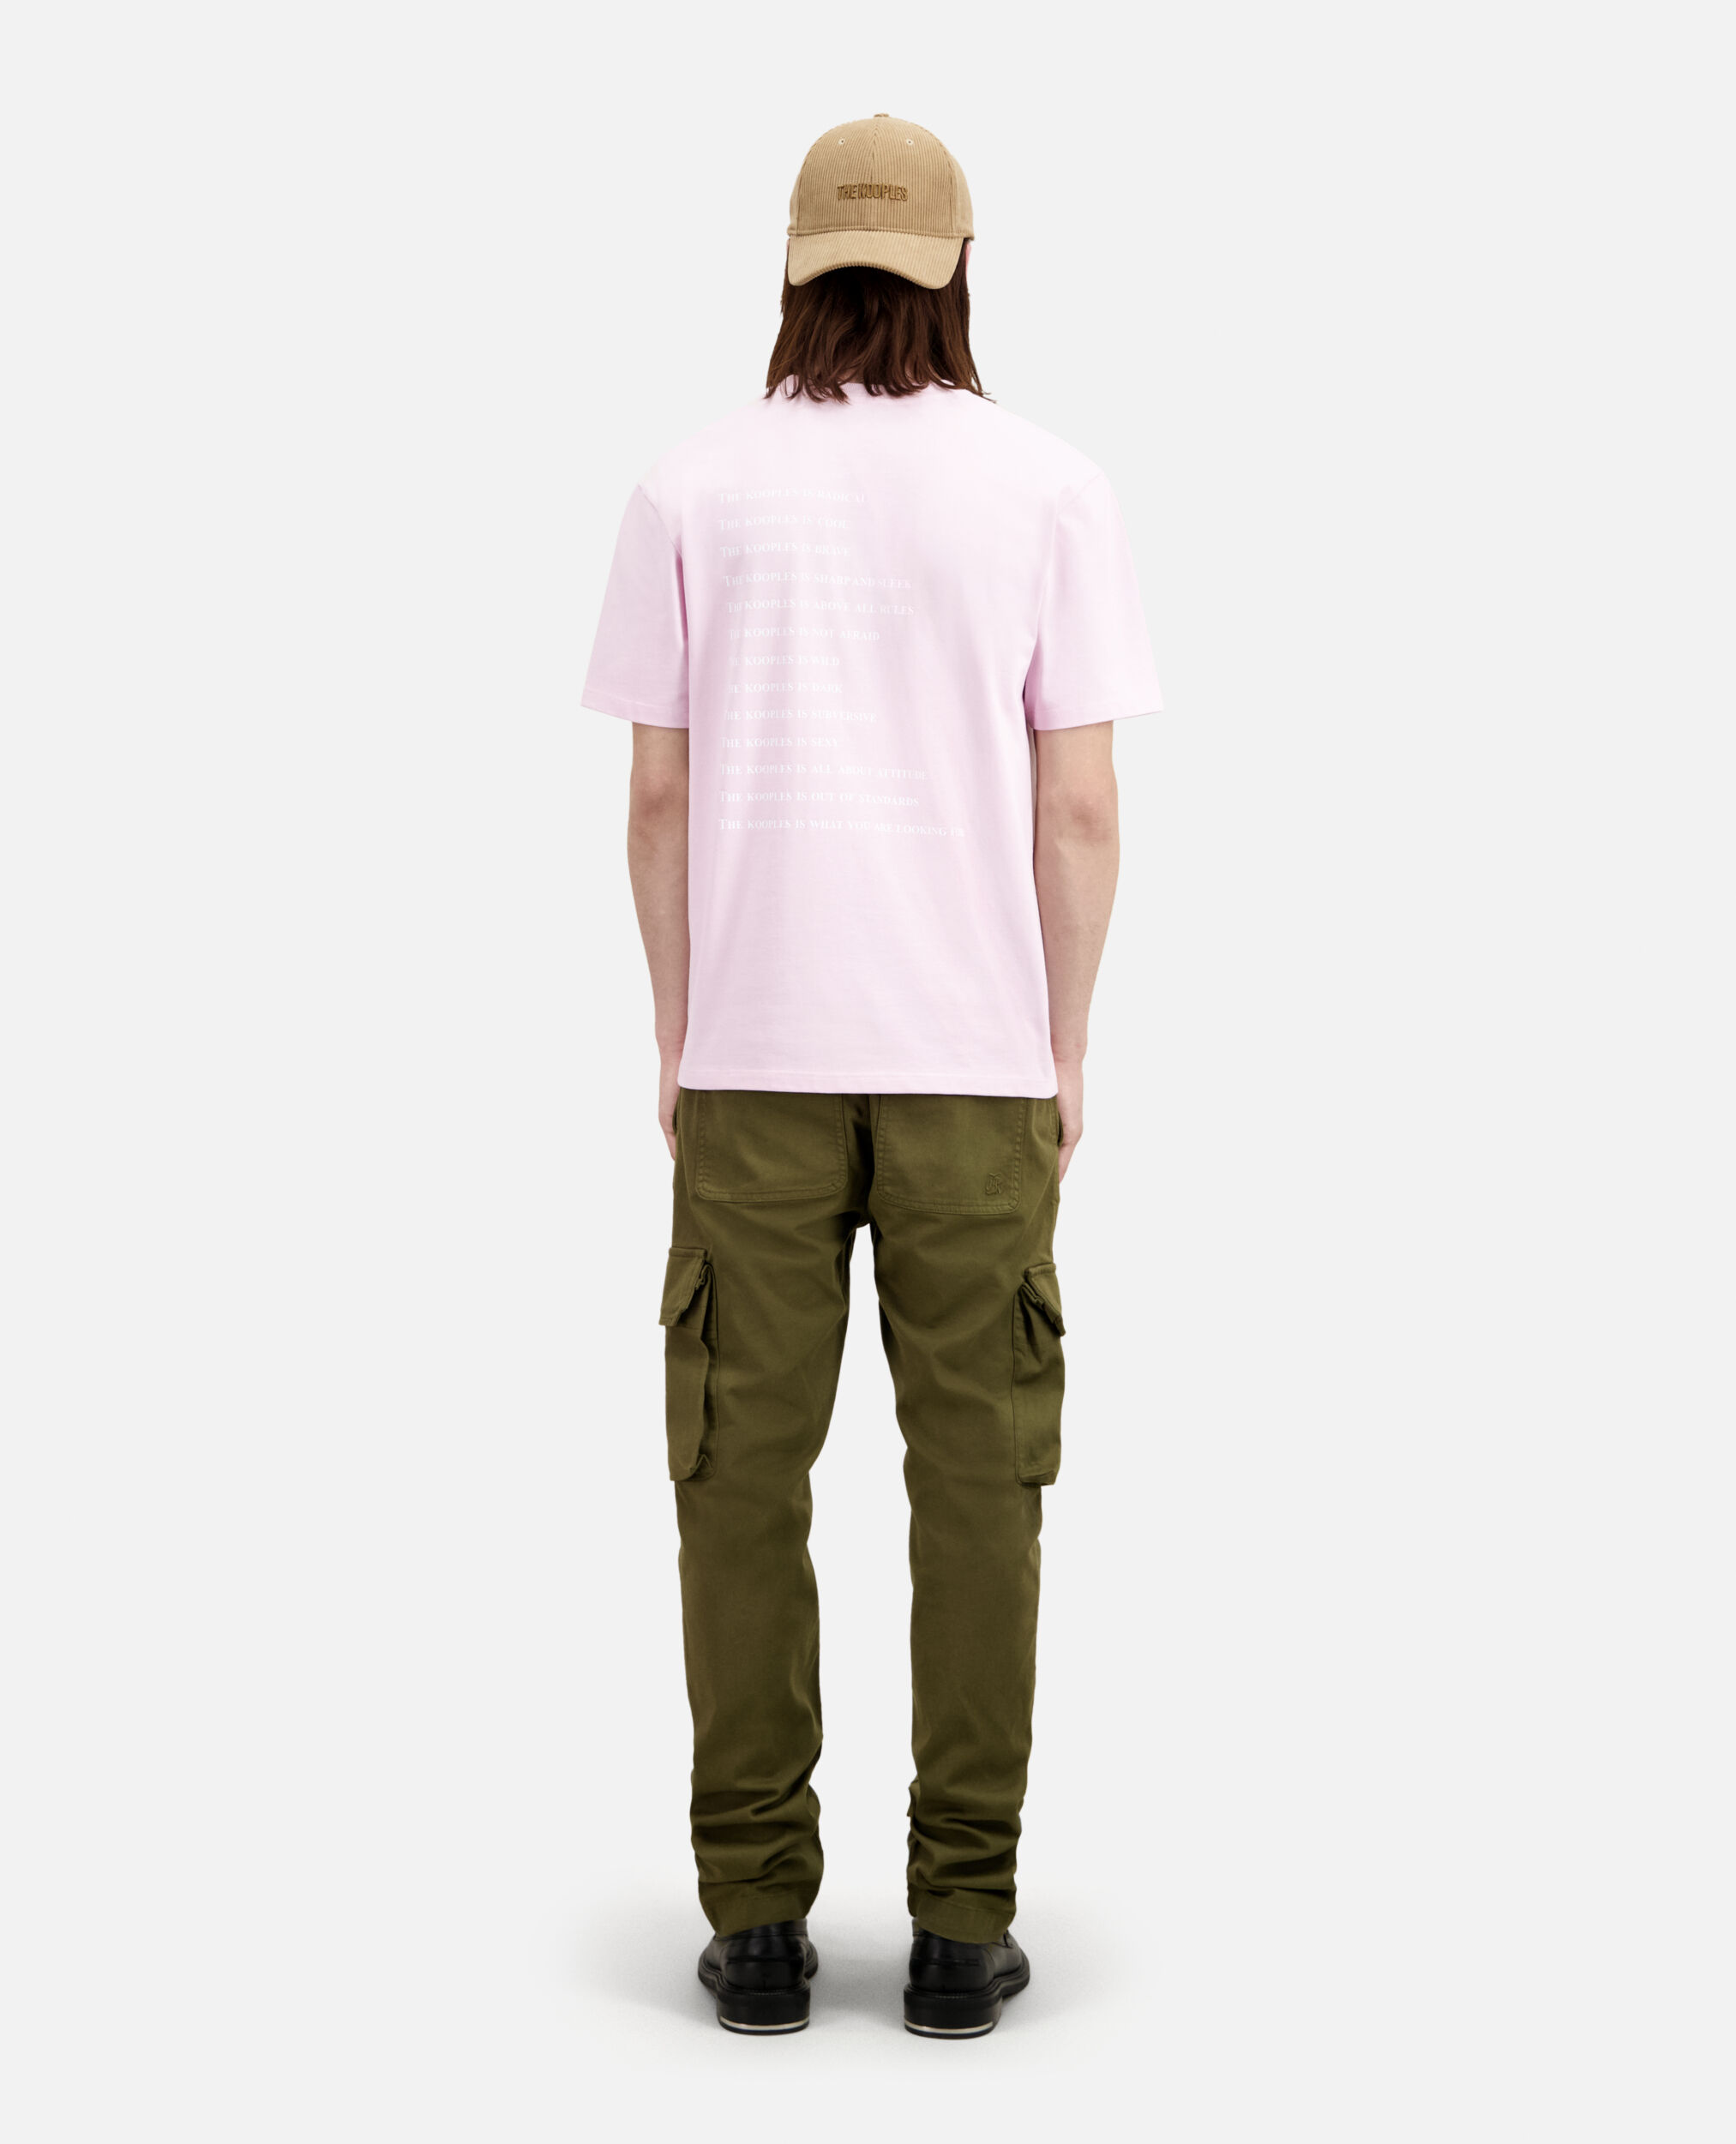 Camiseta What is rosa para hombre, PALE PINK, hi-res image number null